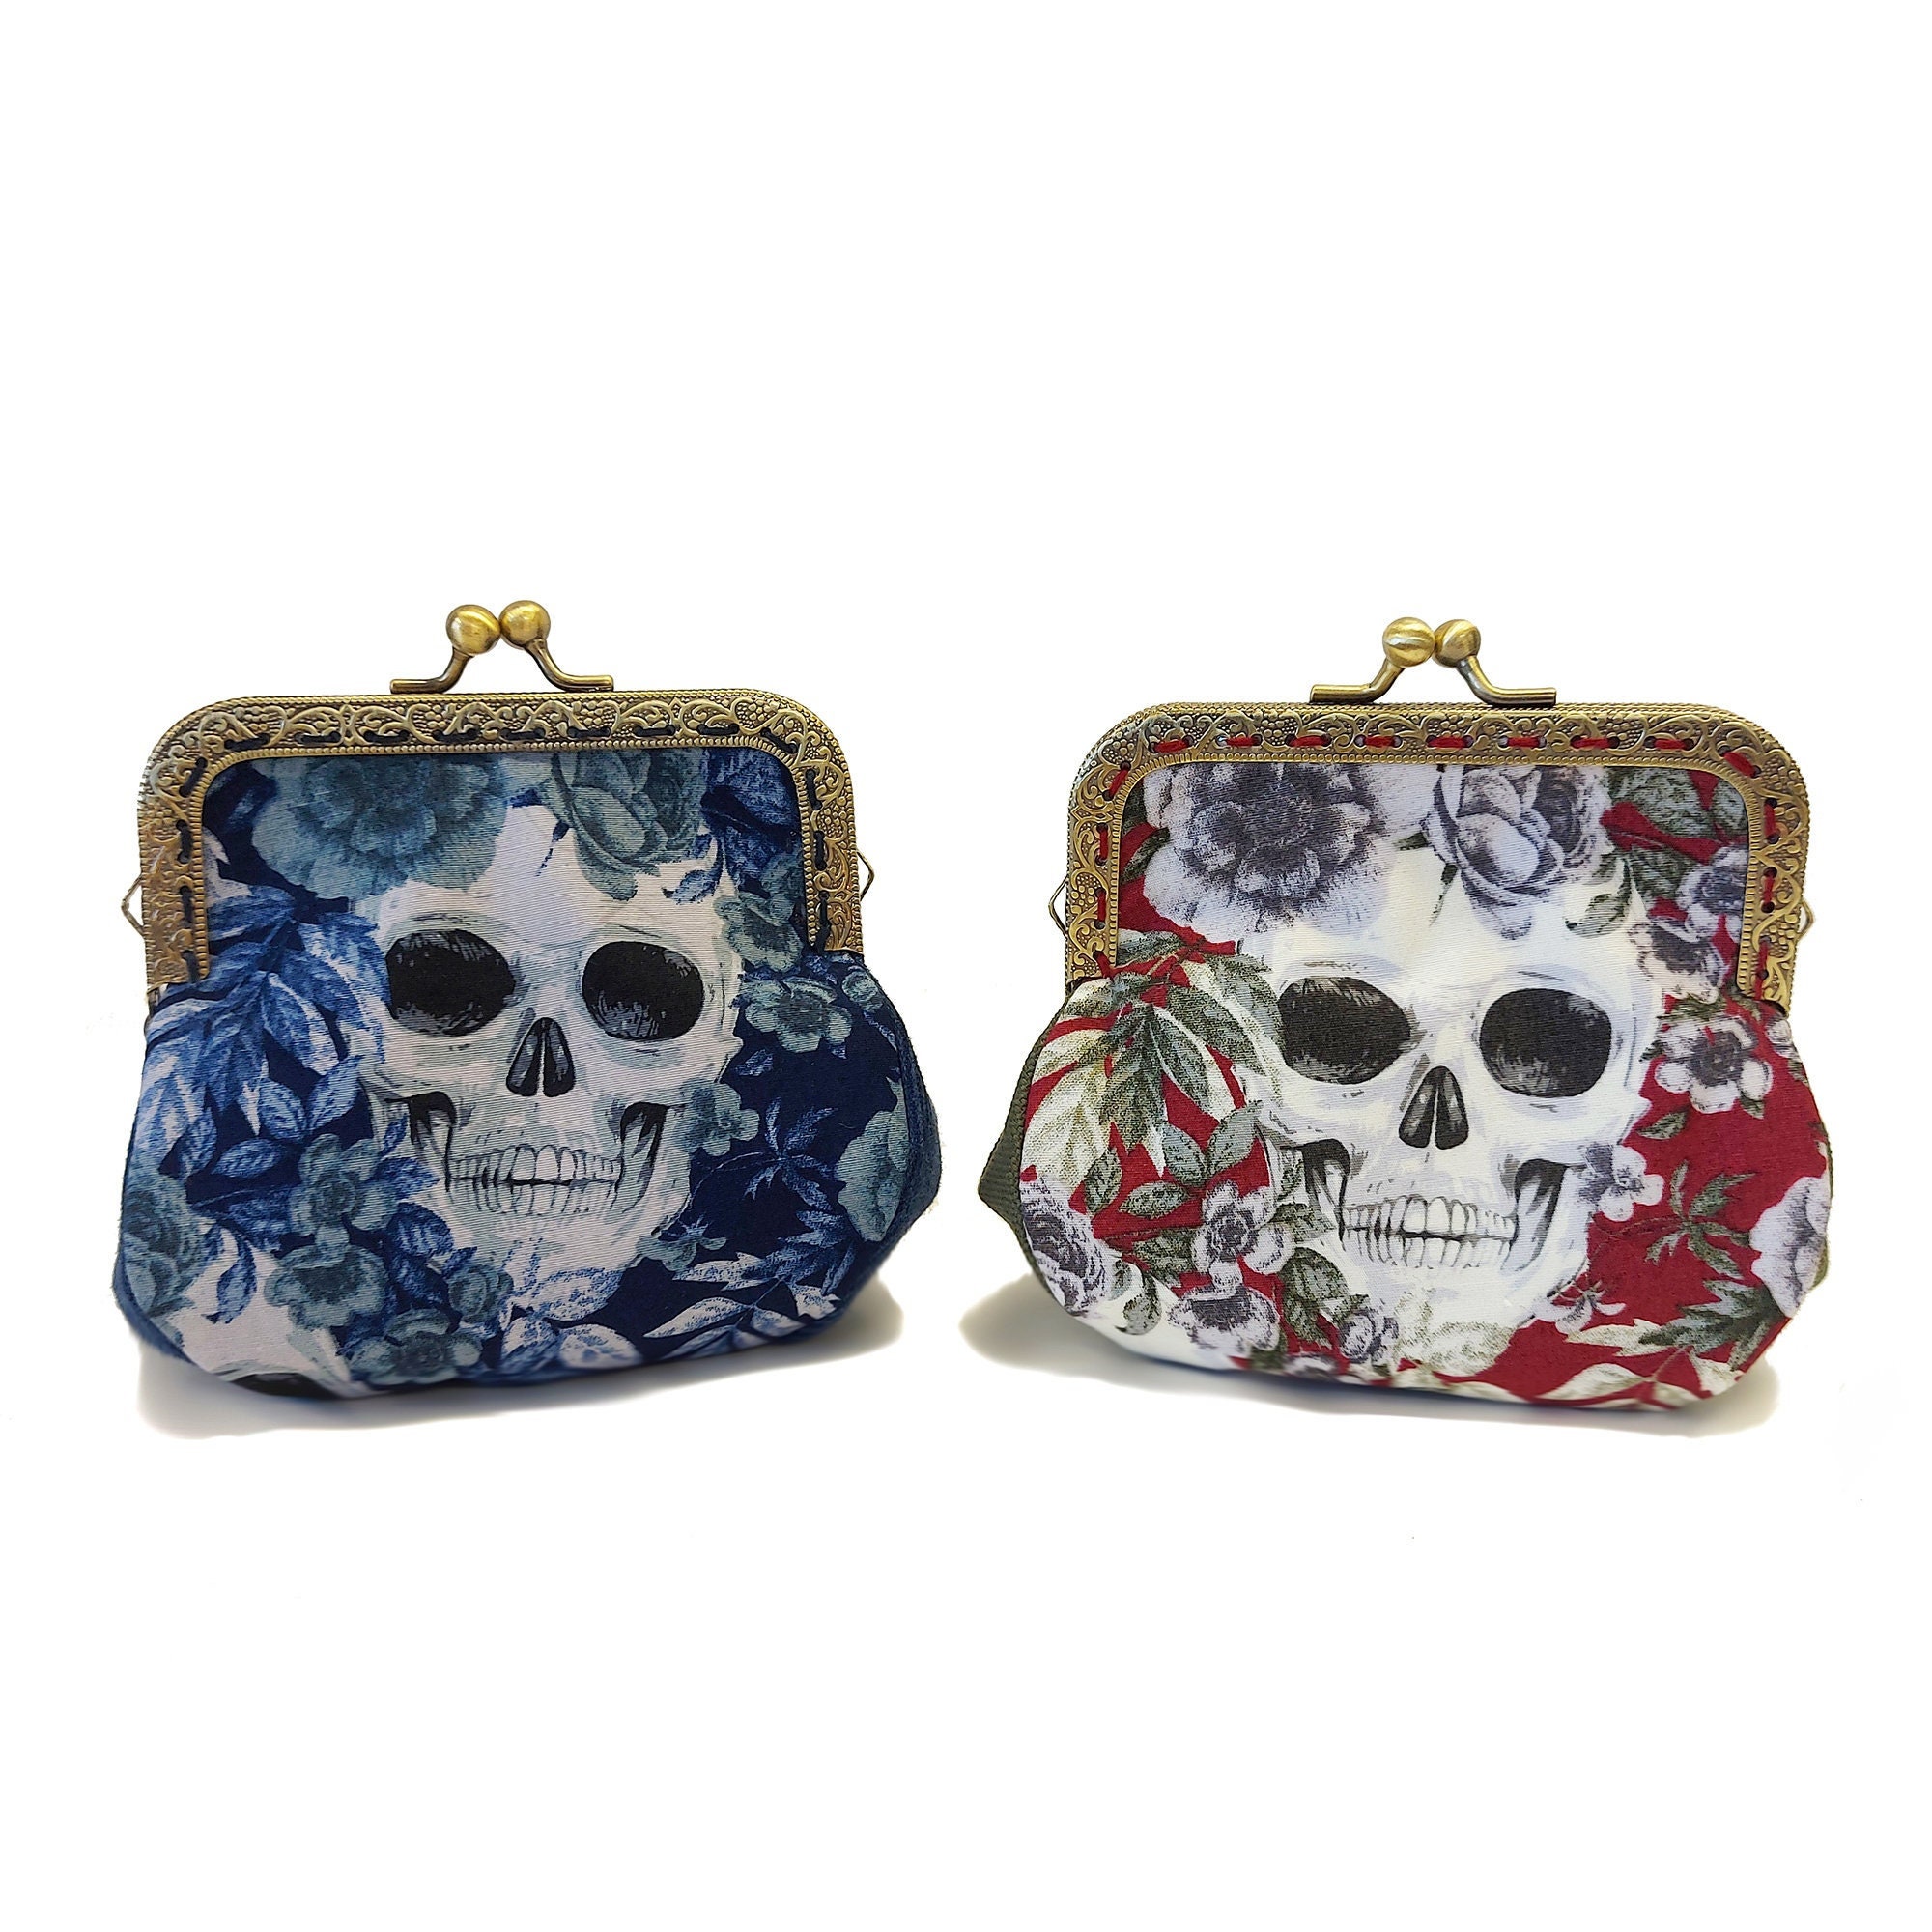 Vintage Skulls and Flowers Print Coin Purse by Loli. Blue, Black or Red